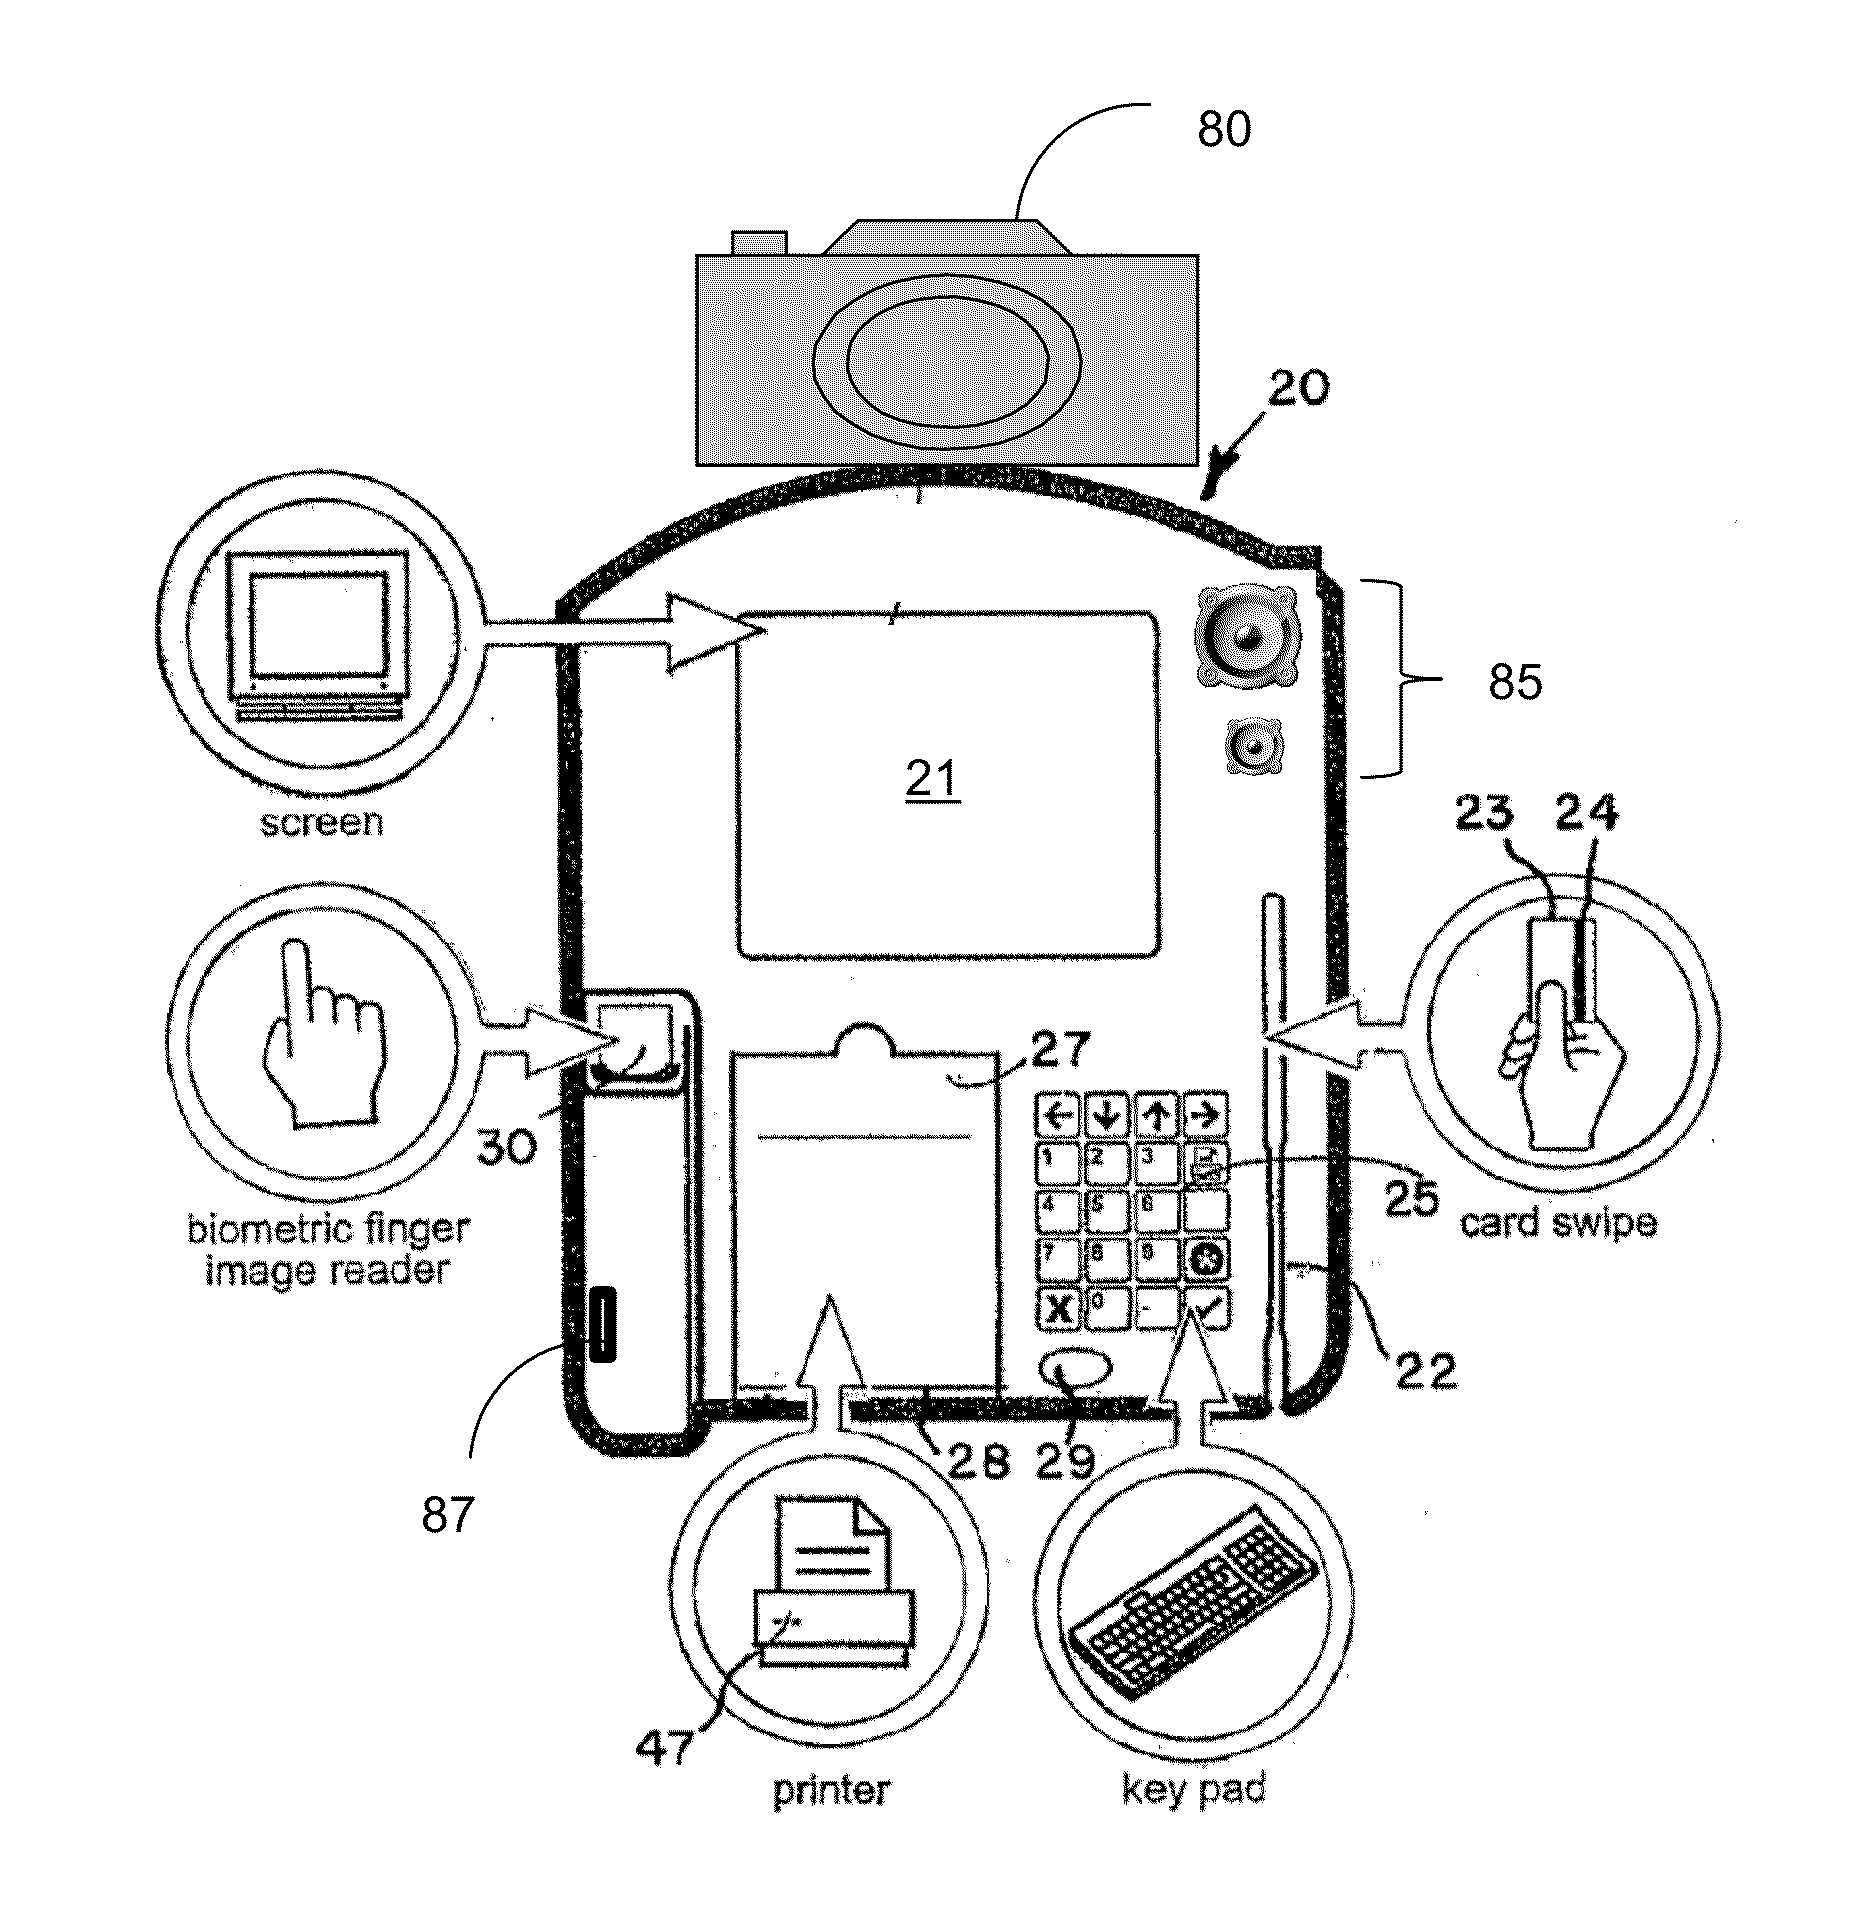 Method and apparatus for hiring workers